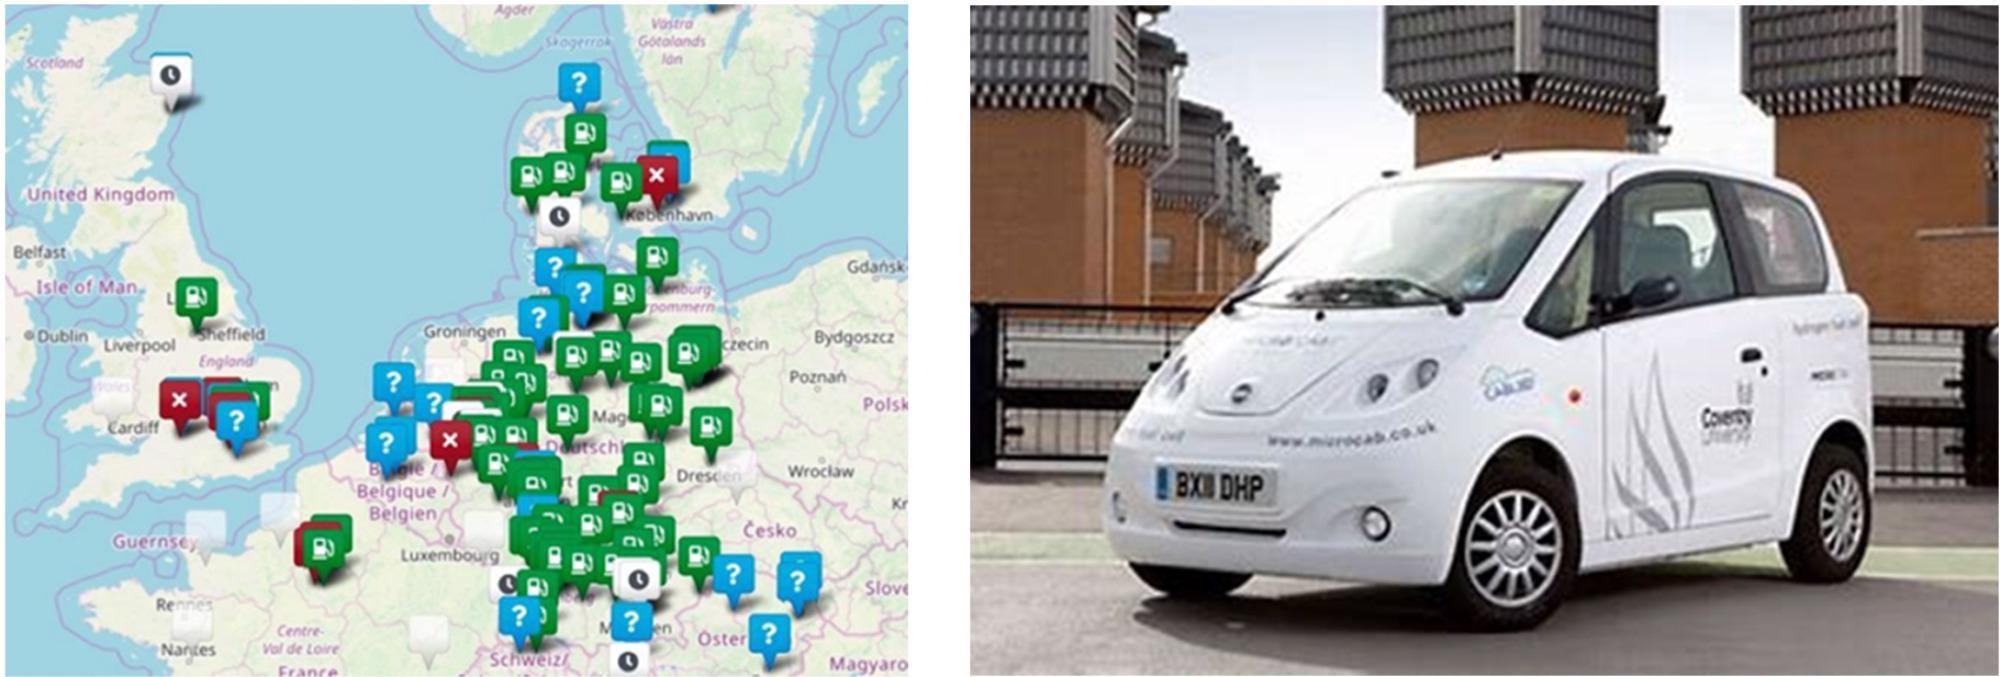 Left: 2021 hydrogen stations in the UK compared to the EU, showing that the UK has only 12 stations in 2021 with only 4 working, which is well behind Germany with 93; Right: Microcab HFCBEV taxi/van built in Birmingham.